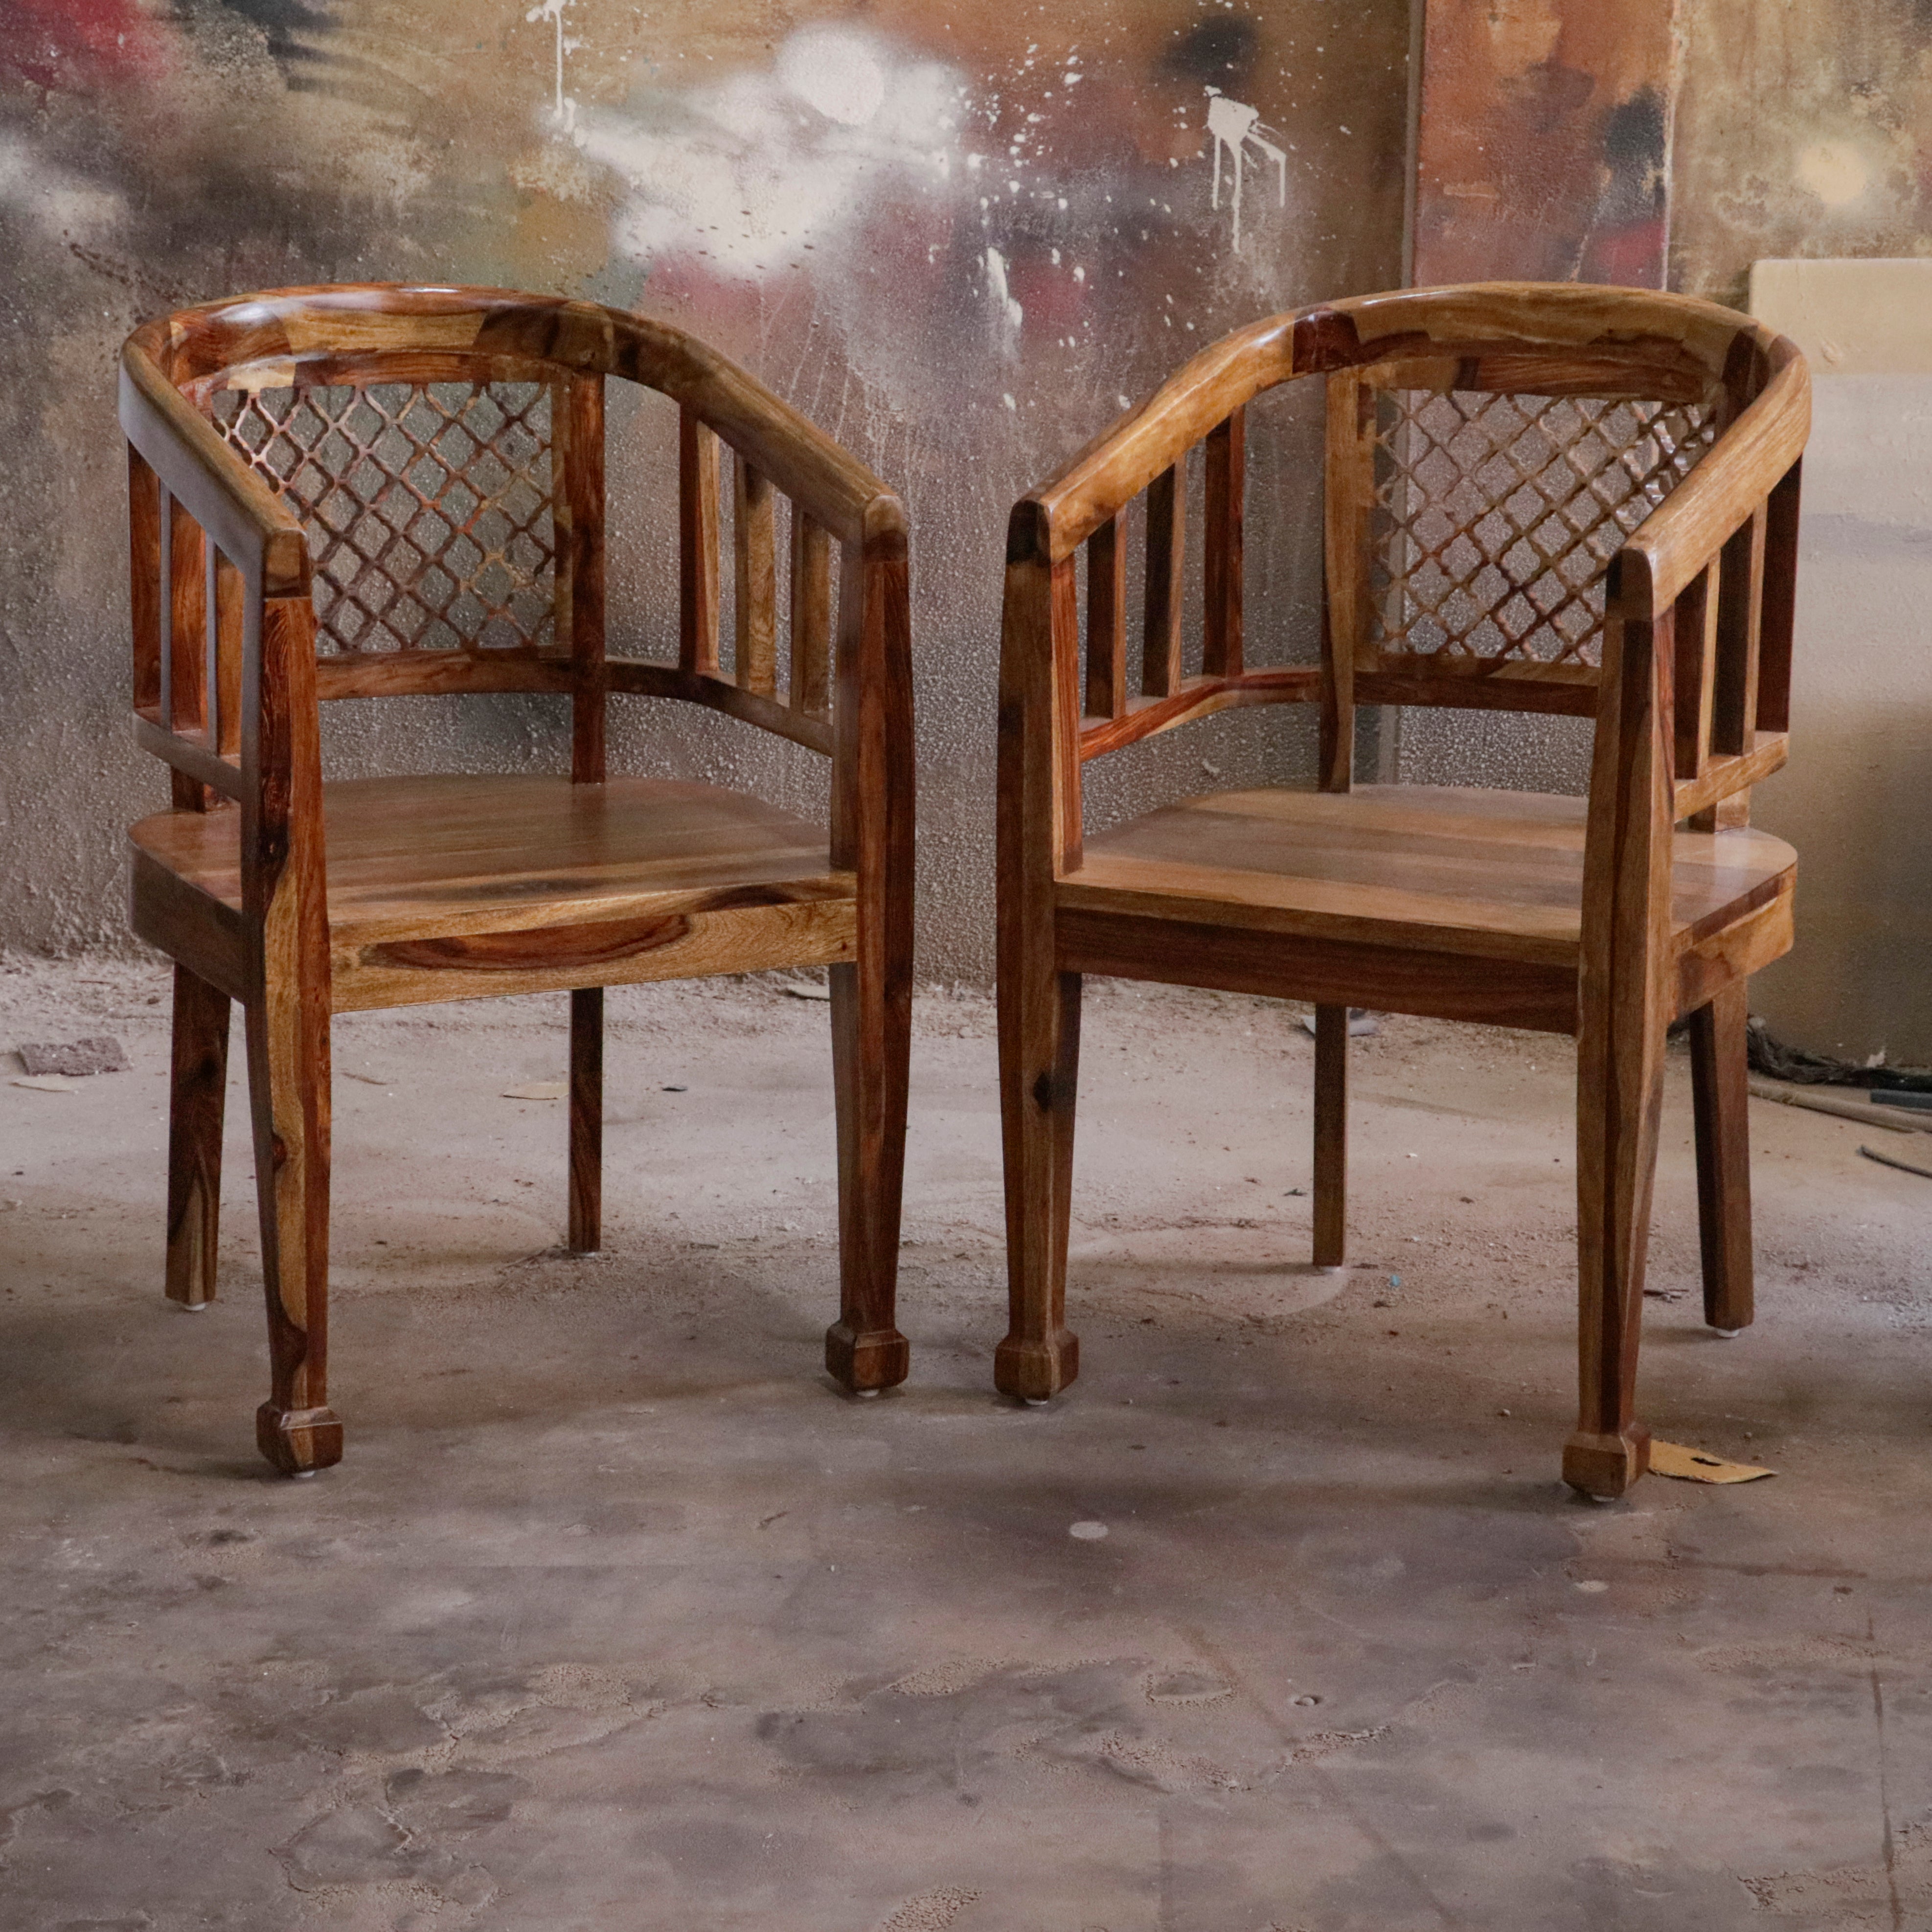 Vintage Natural Brown Finished Wooden Handmade Chair Set of 2 Arm Chair